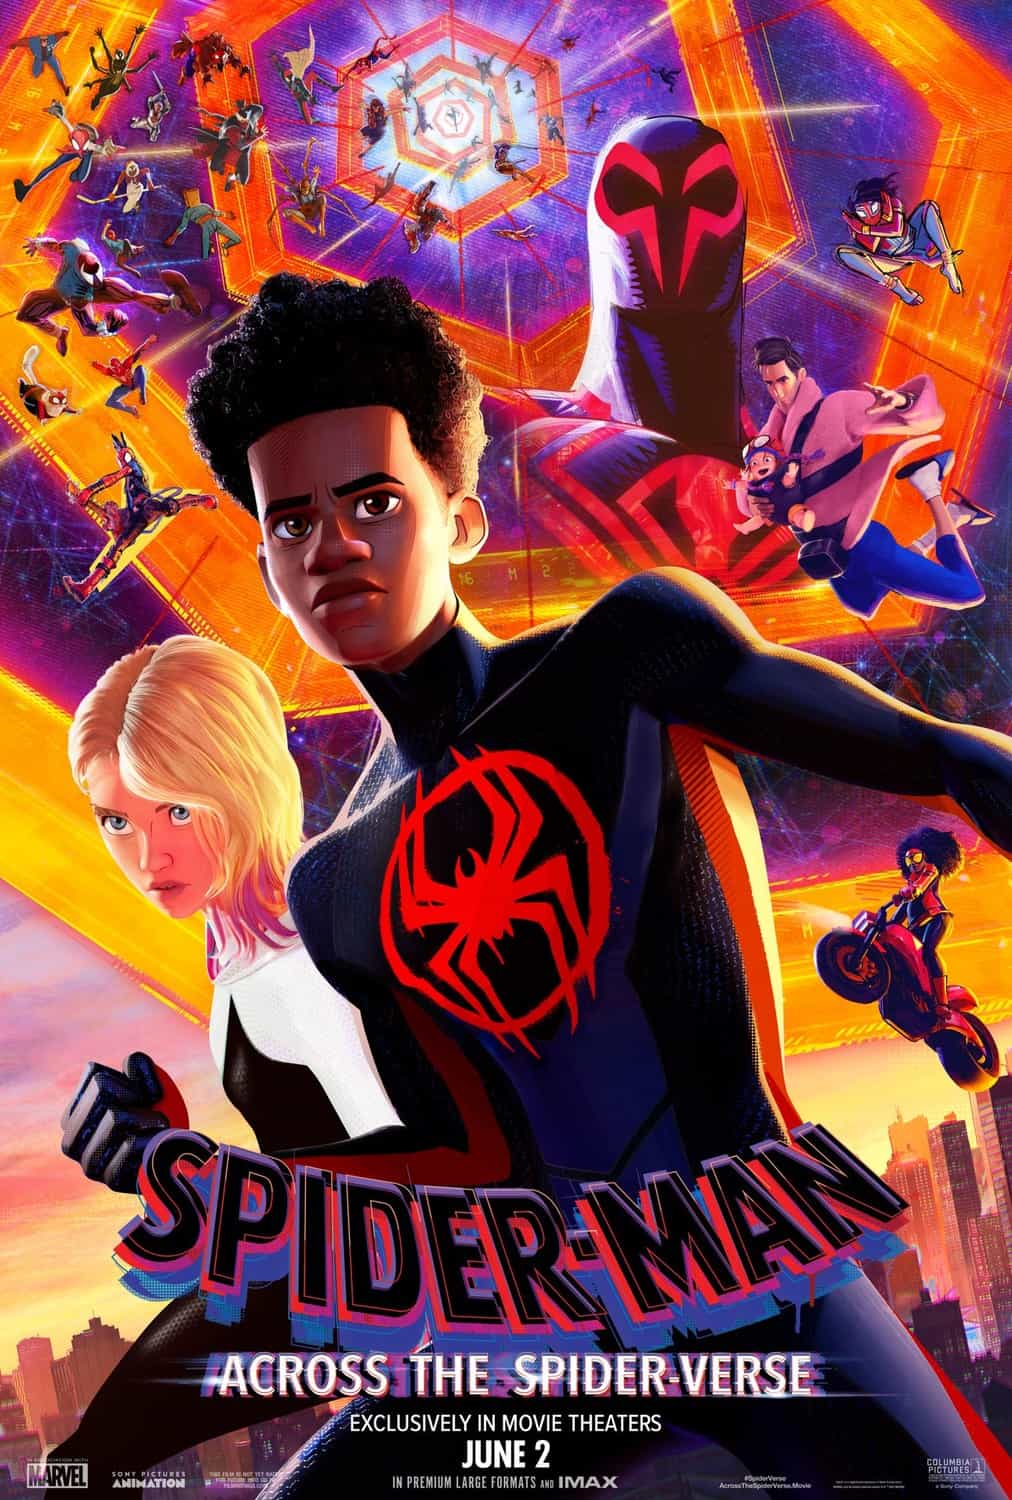 US Box Office Weekend Report 23rd - 25th June 2023:  Spider Man: Across the Spider Verse moves back to the top of the US box office, Jennifer Lawrence stars in the top new movie of the weekend No Hard Feelings